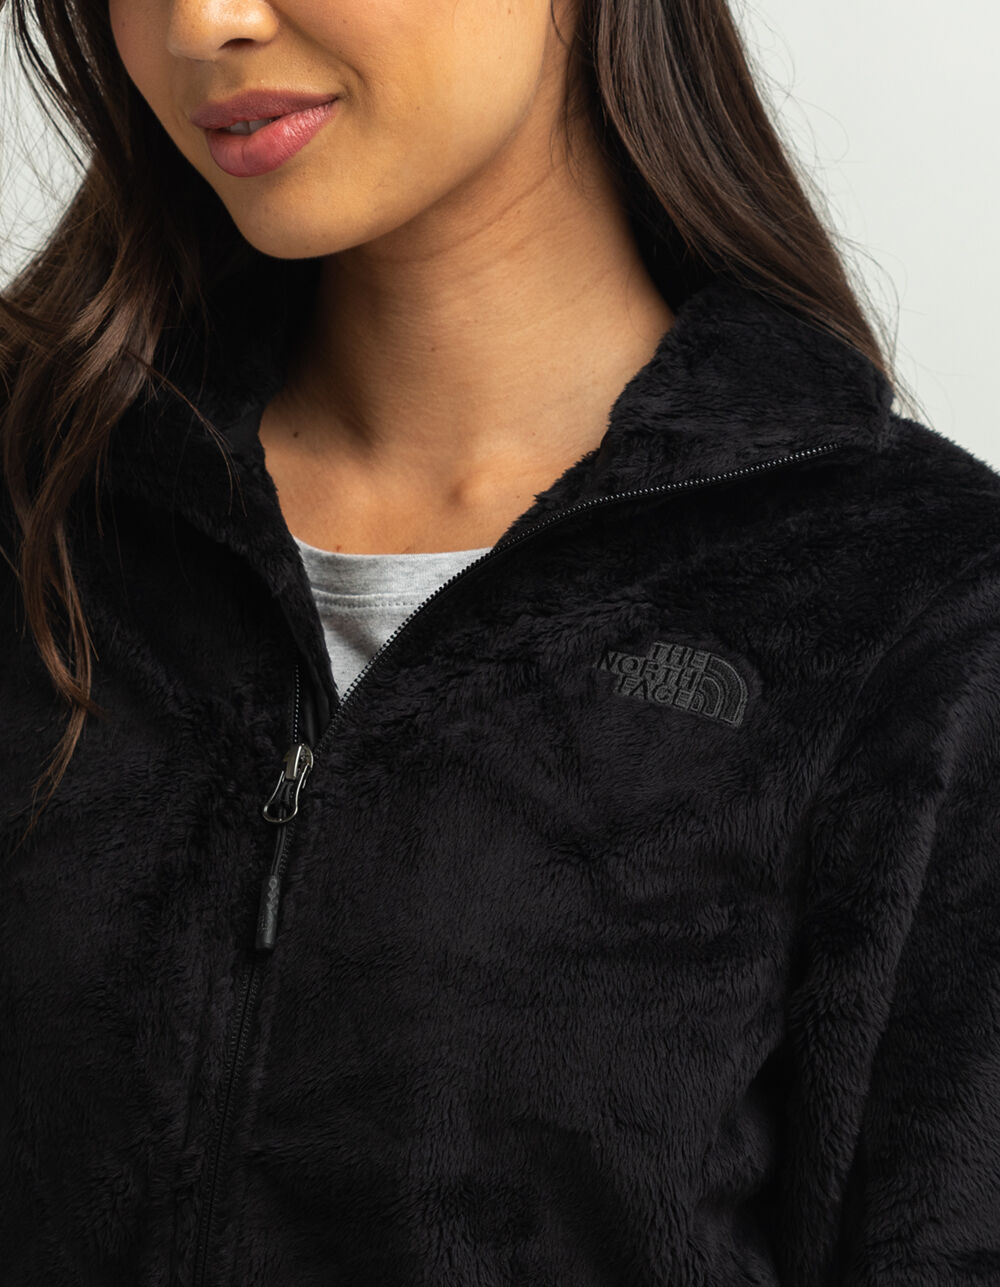 THE NORTH FACE Osito Womens Jacket - BLACK